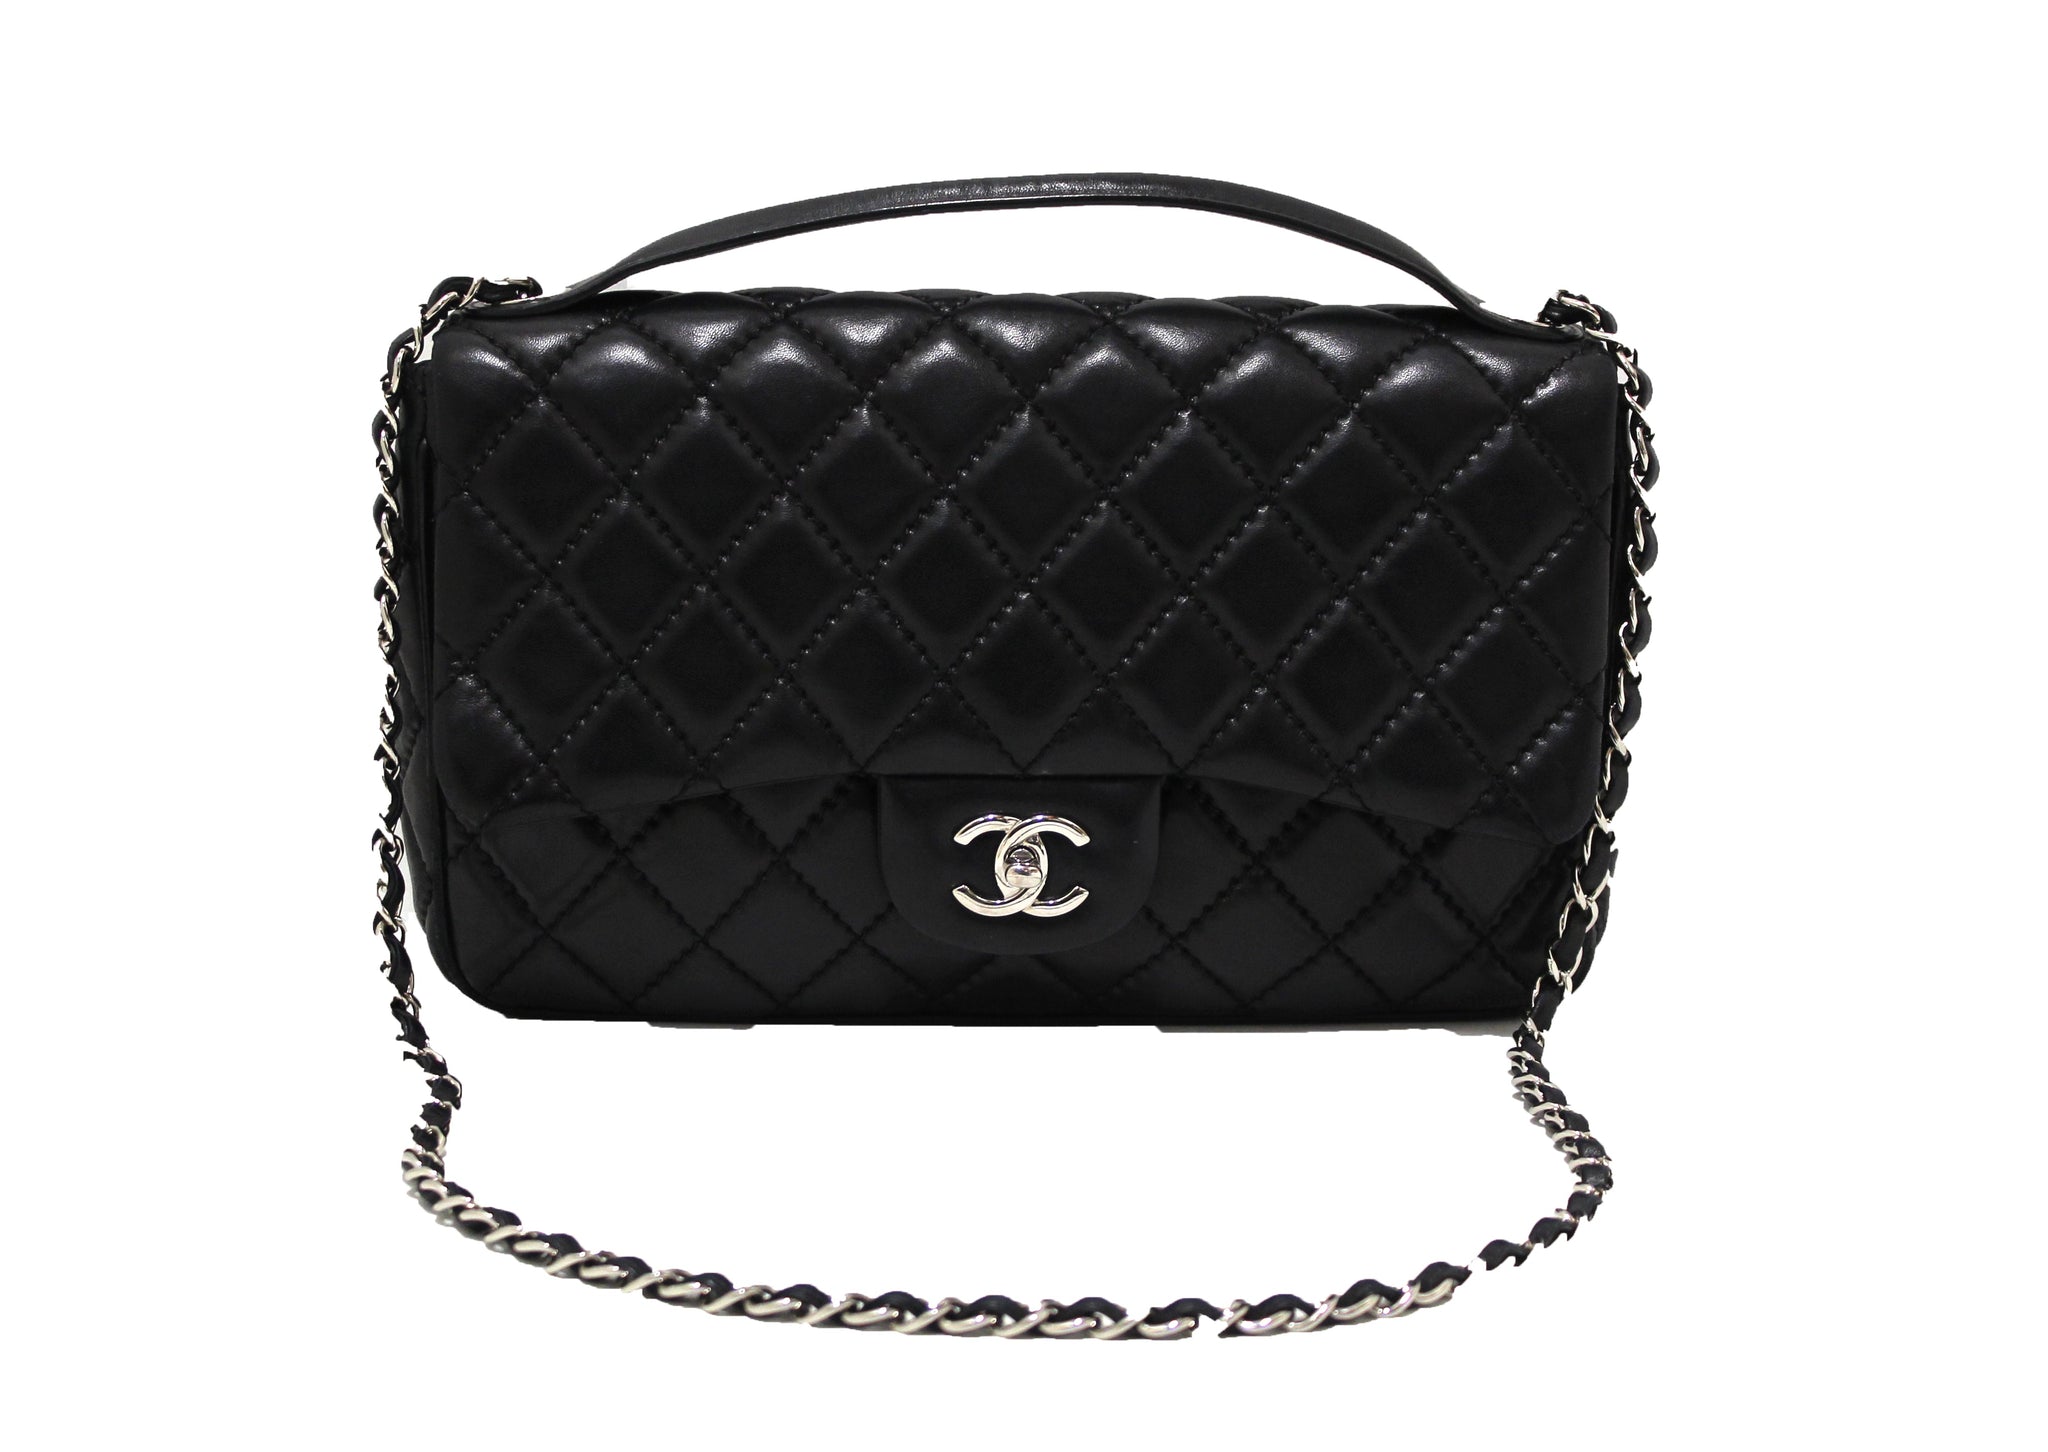 Chanel Jumbo Single flap bag in two-tone calfskin with silver